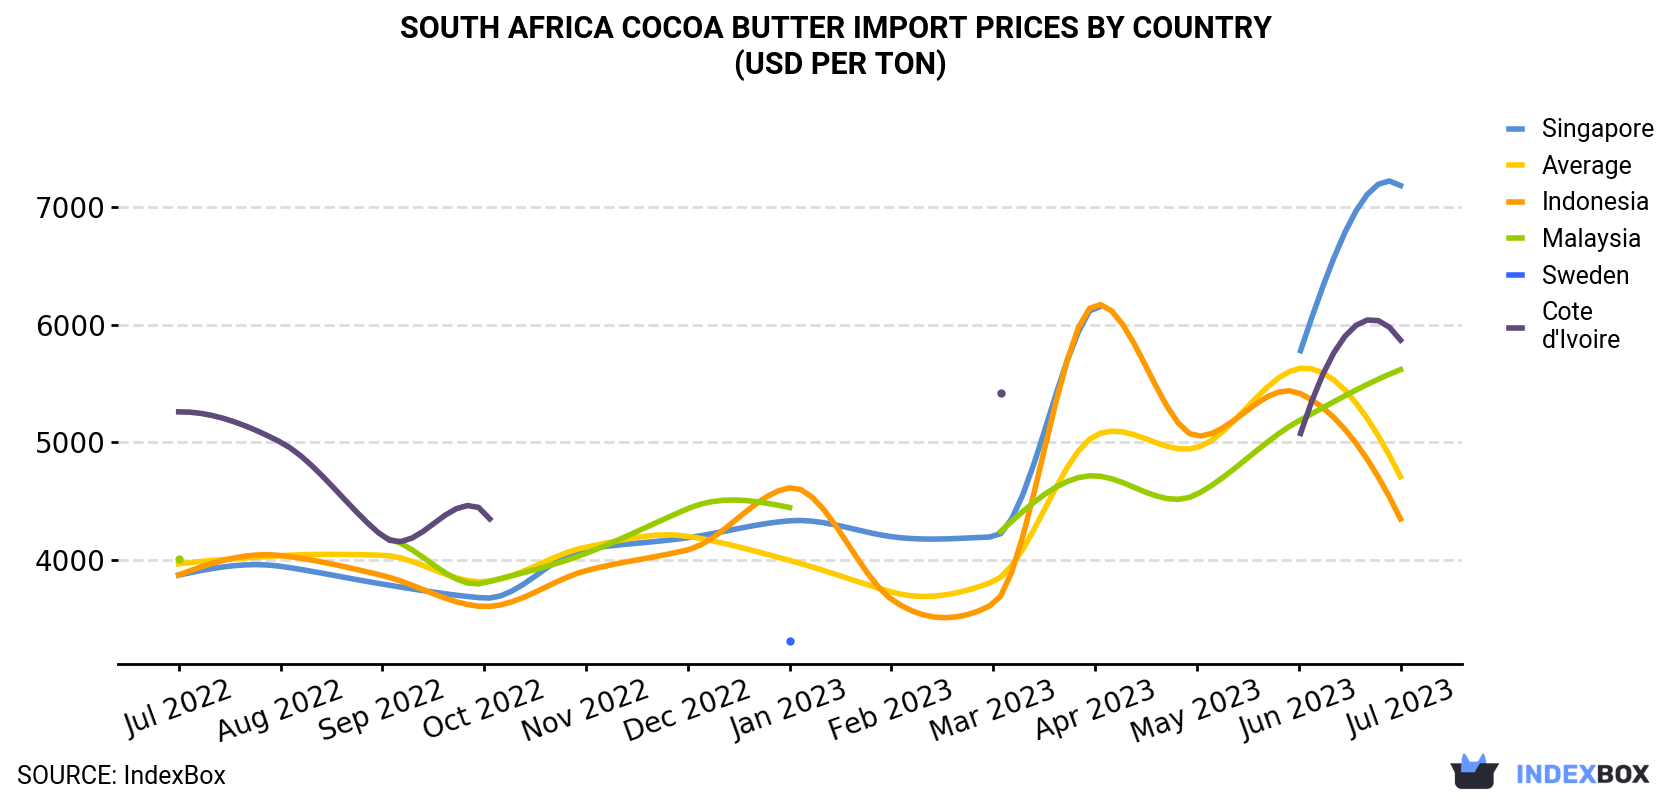 South Africa Cocoa Butter Import Prices By Country (USD Per Ton)